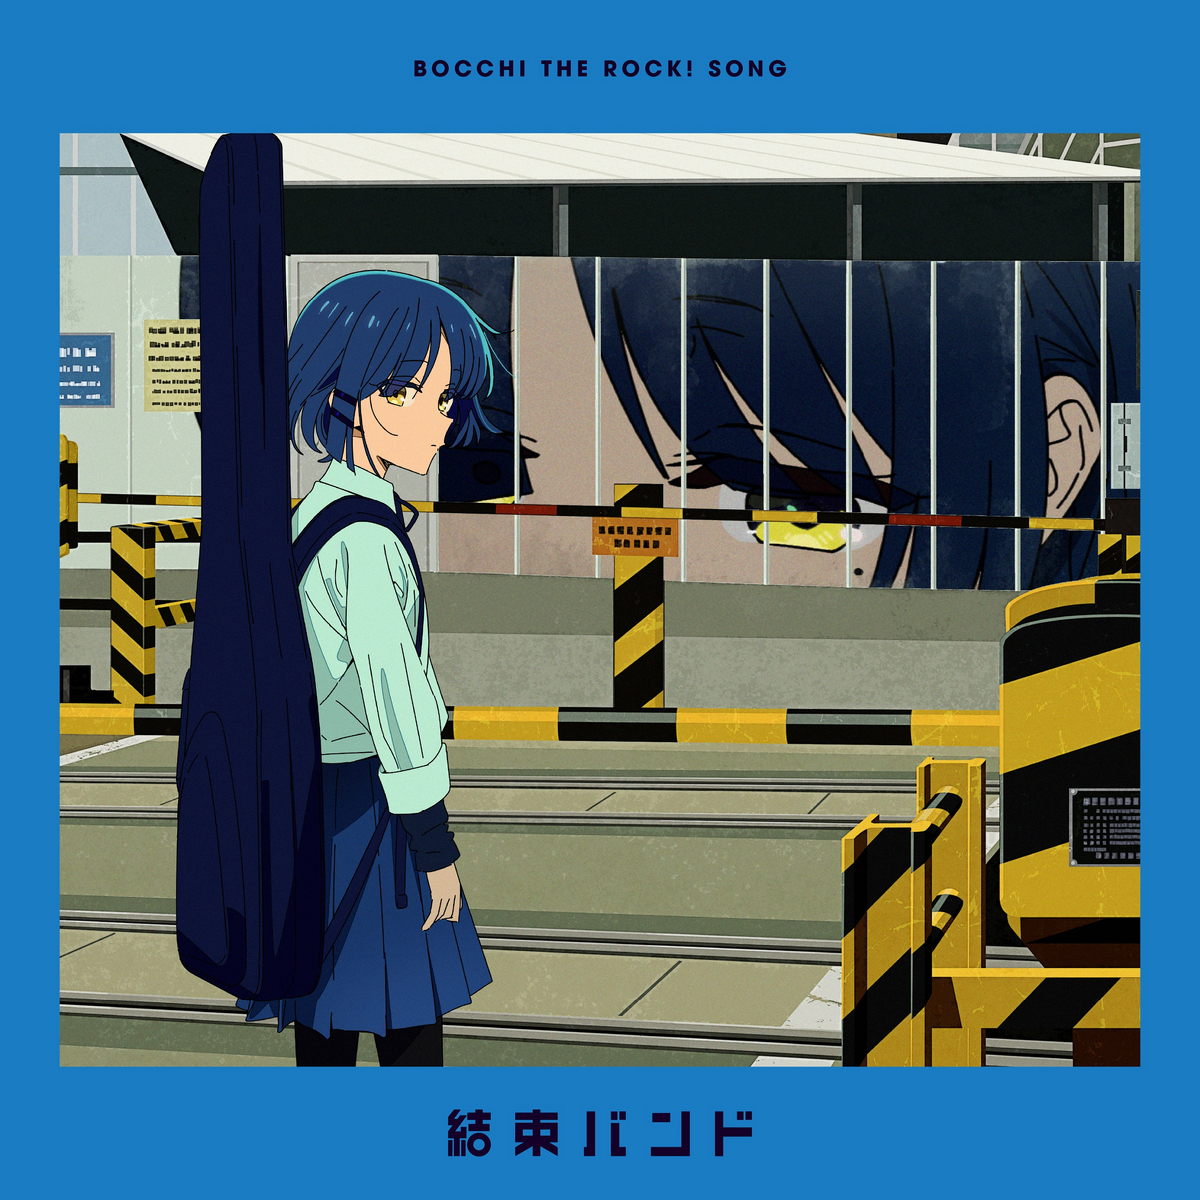 Otakus recreate albums by famous bands using the girls from Bocchi